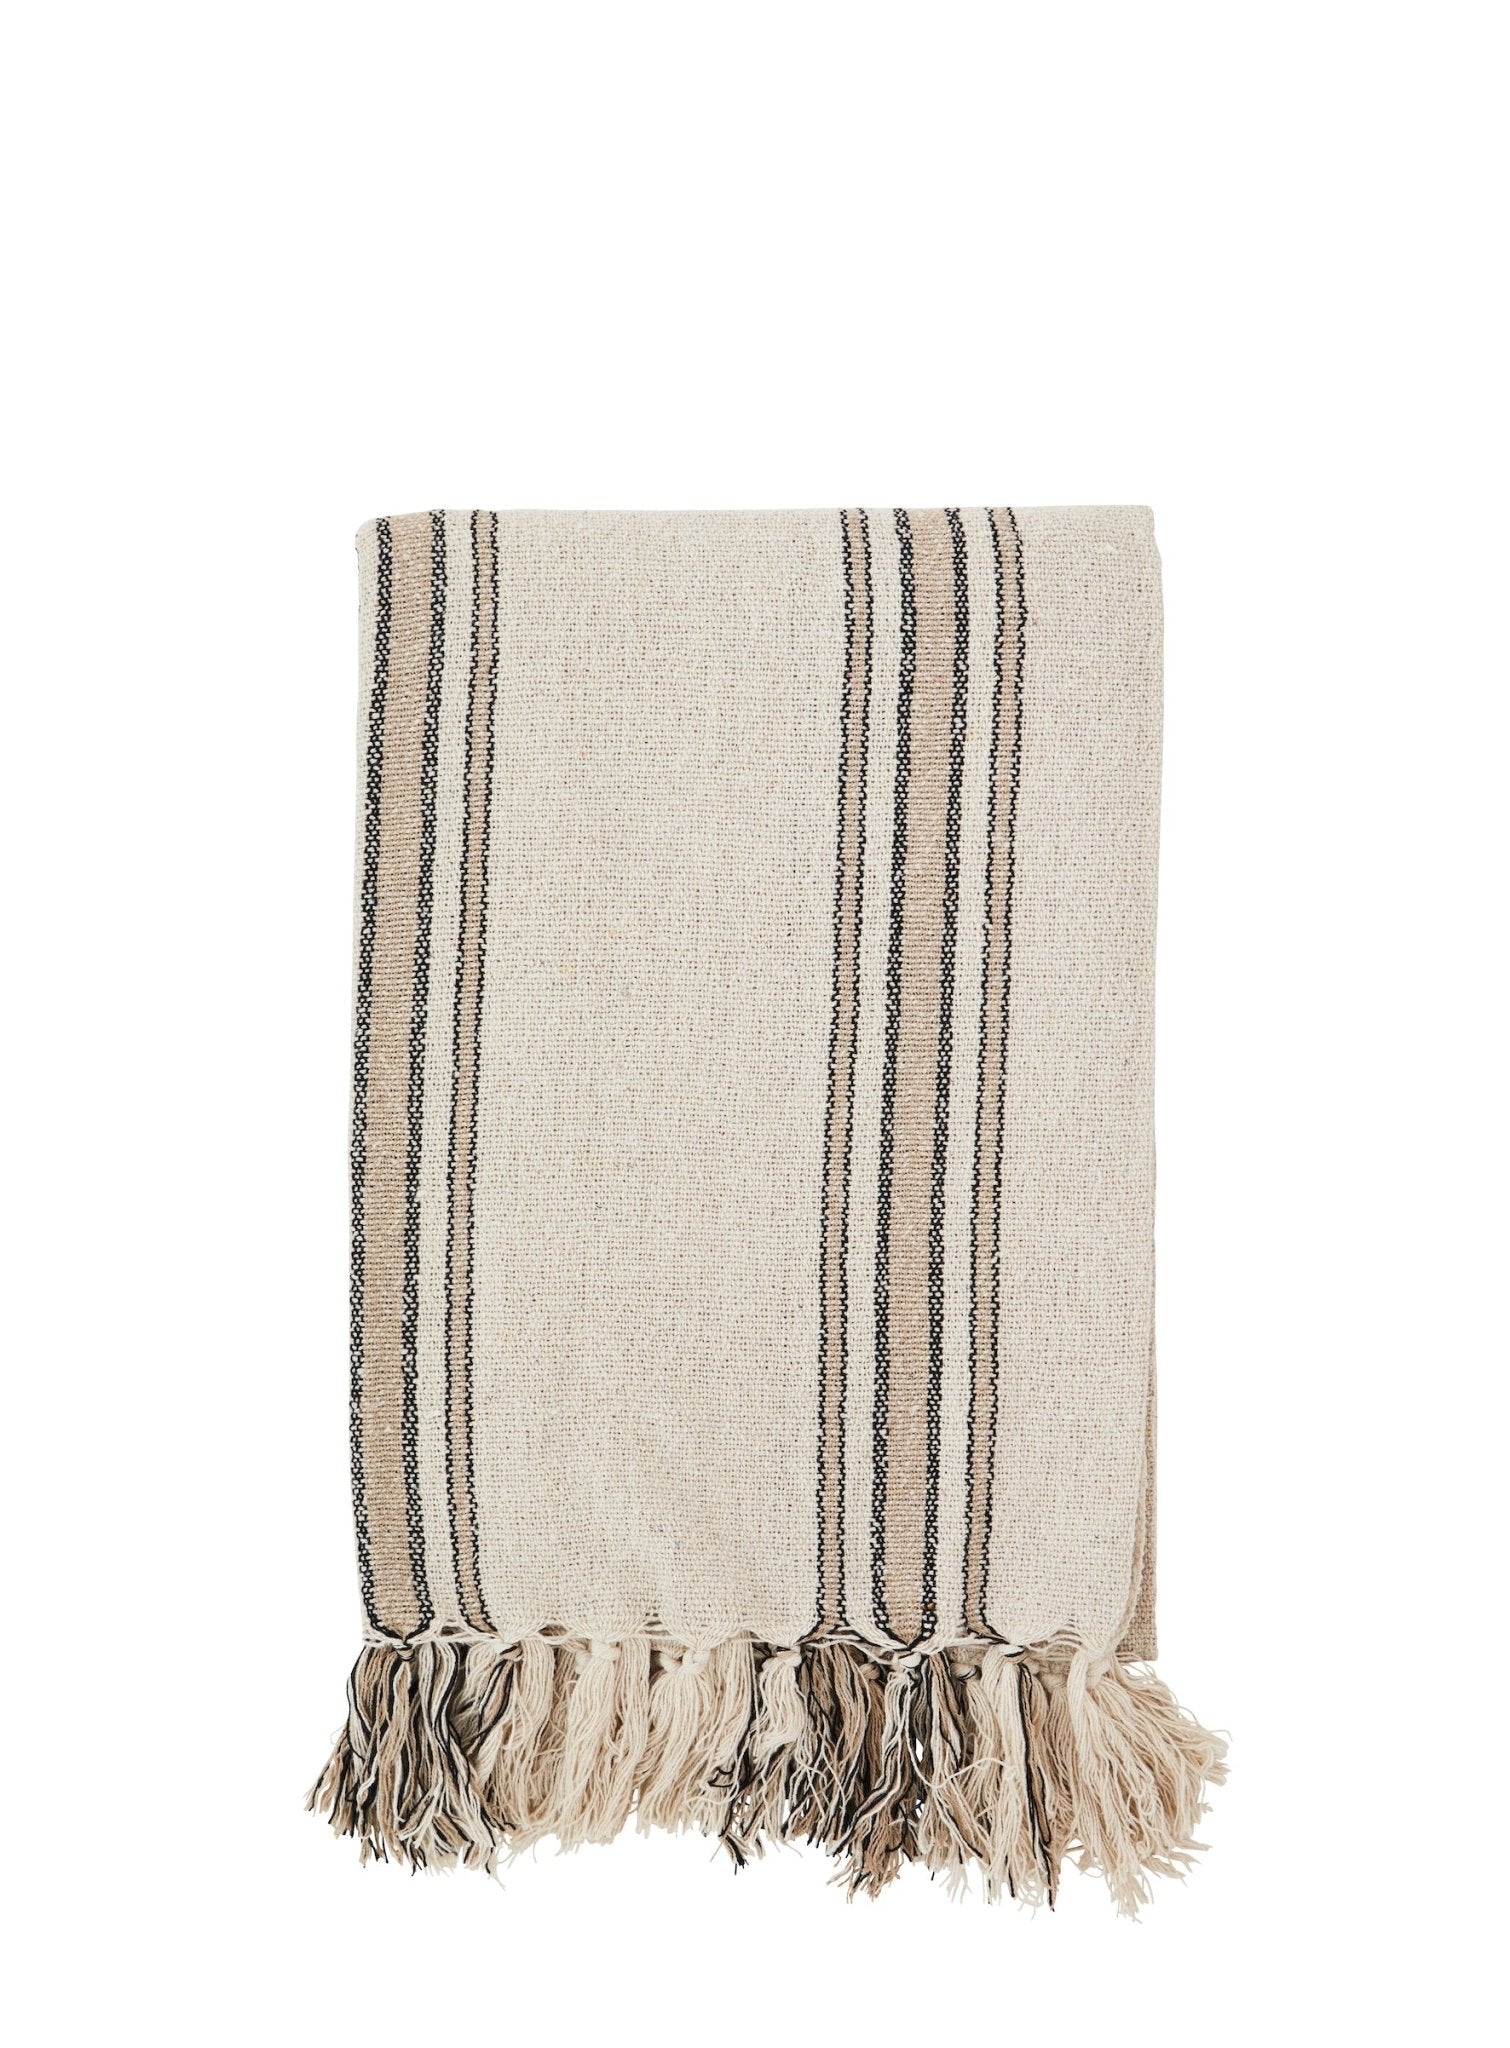 Ecru and sand throw/ blanket with fringes - Natalia Willmott